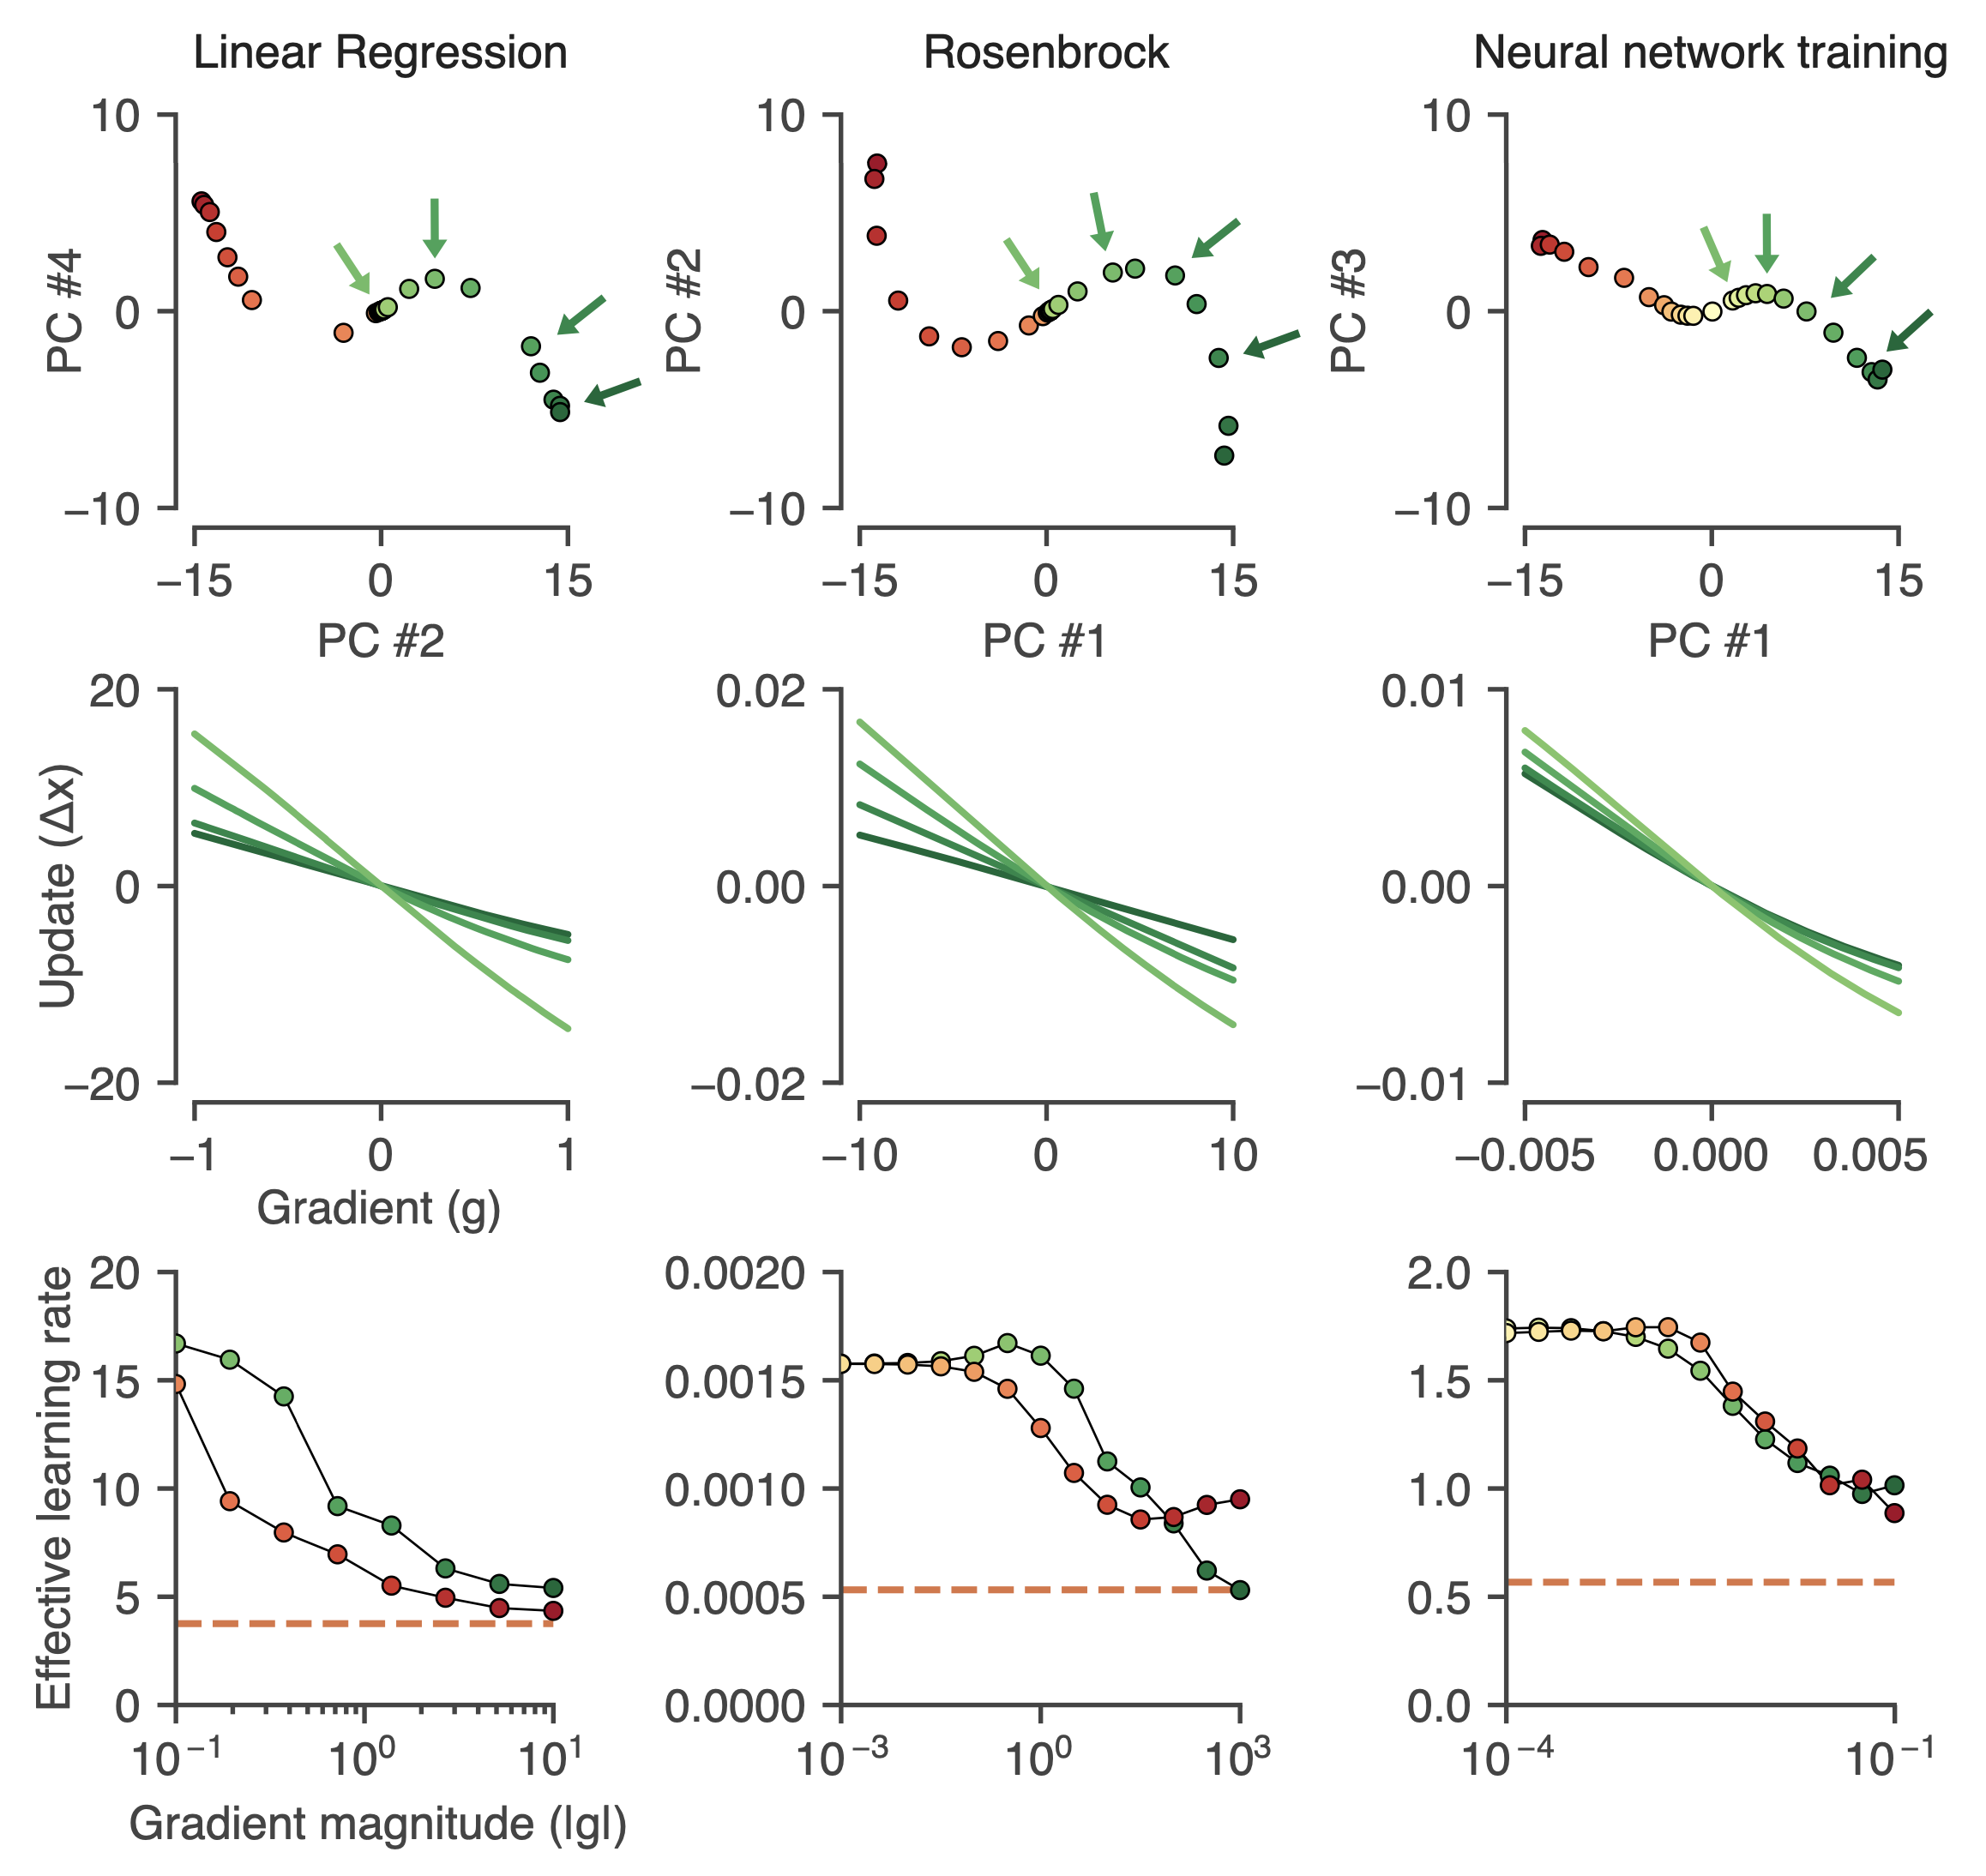 Learning rate adaptation in learned optimizers. Top row: Approximate fixed points of the dynamics computed for different gradients reveal an S-curve structure. Middle row: Update functions computed at different points along the S-curve. Bottom row: Summary plot showing the effective learning rate along each arm of the S-curve. [[source](https://arxiv.org/pdf/2011.02159.pdf)]